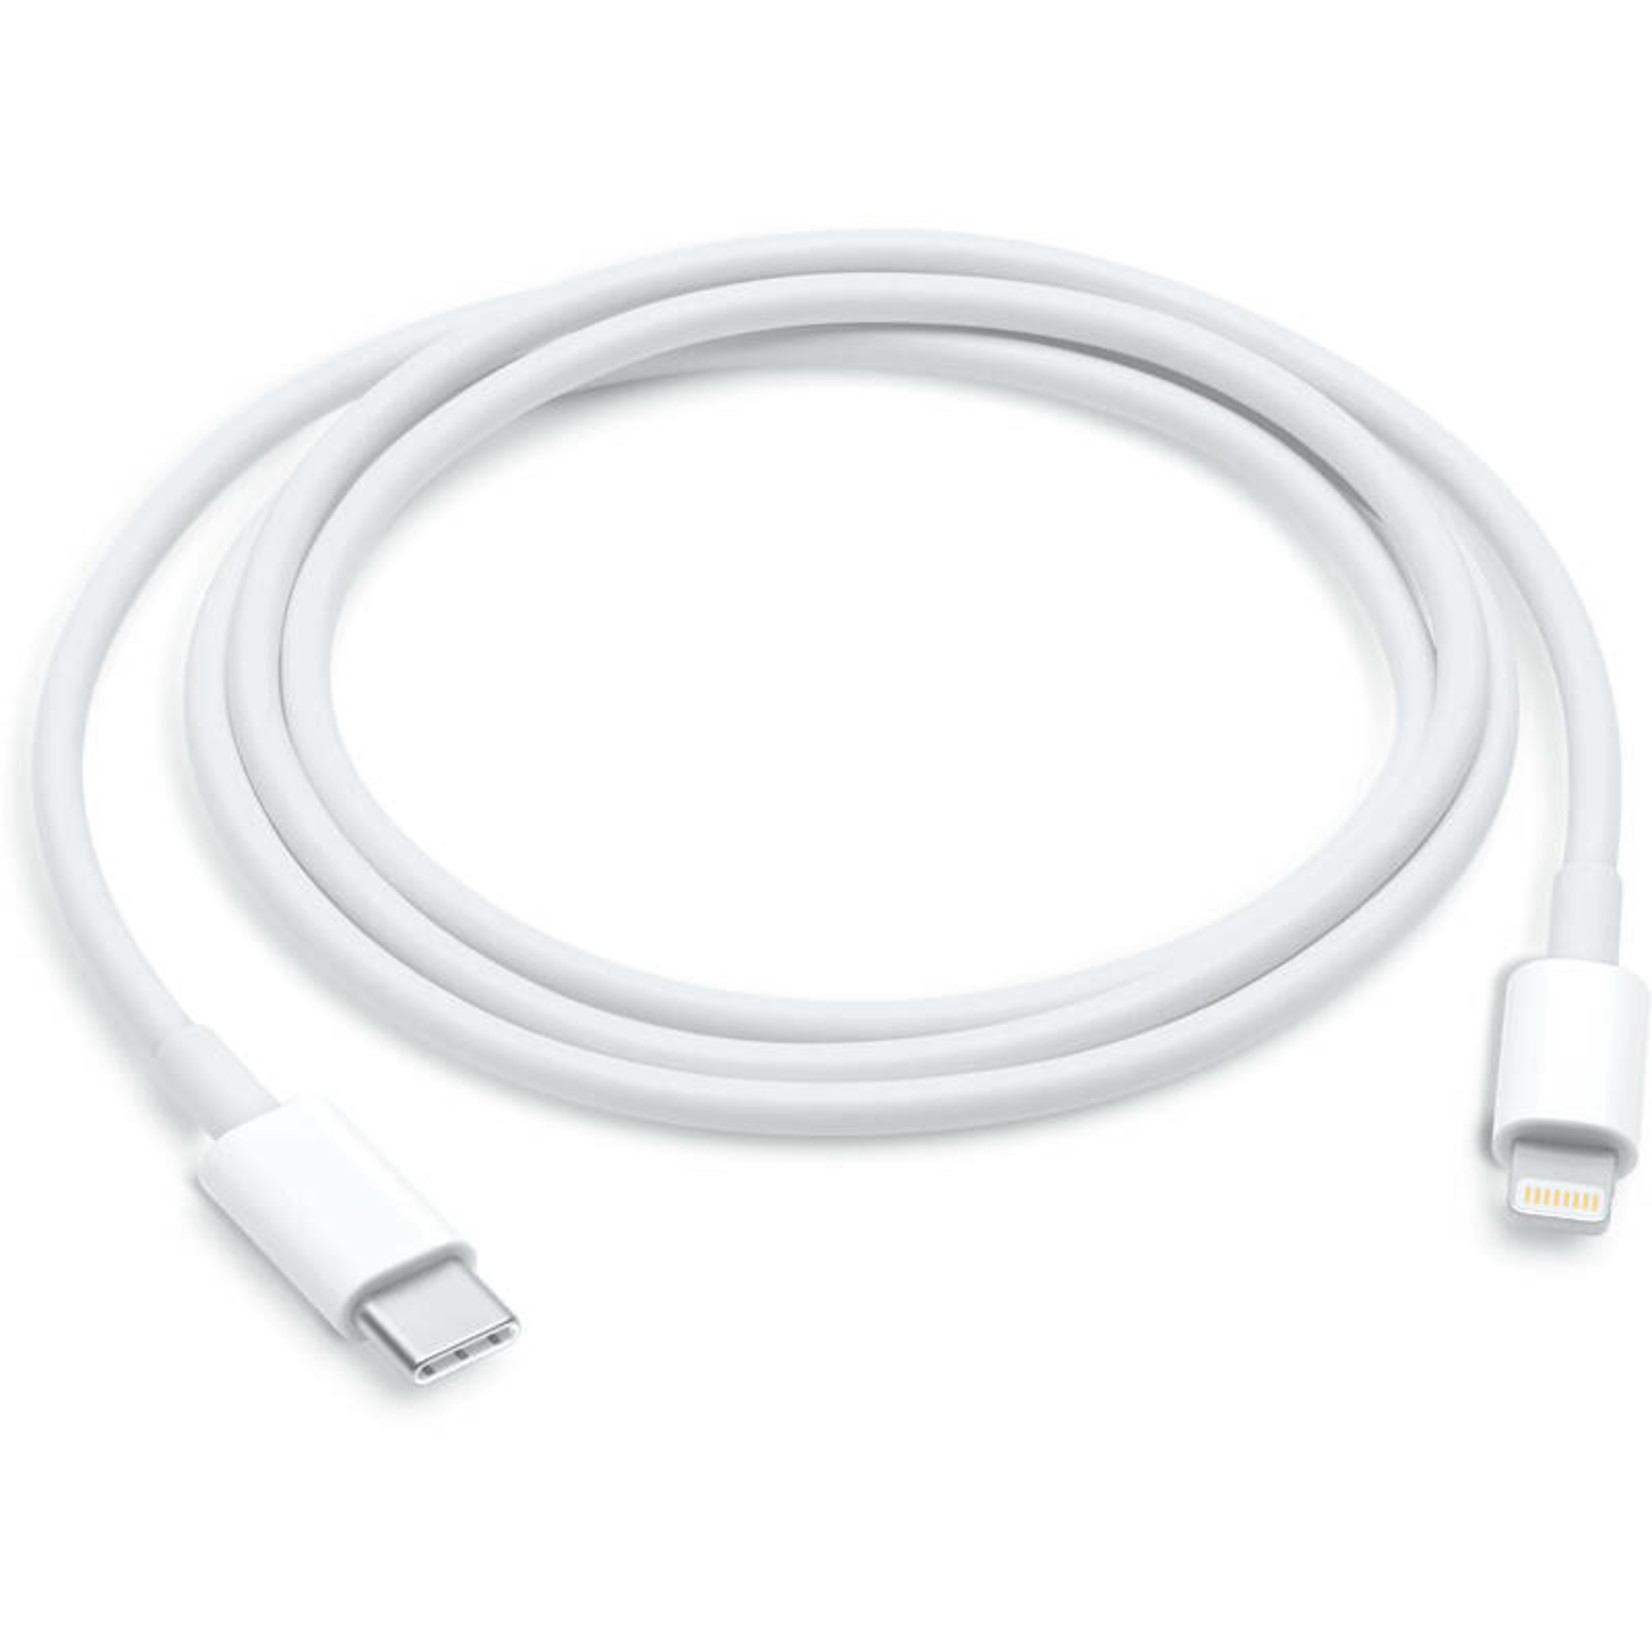 About the Apple USB-C to Lightning Cable - uni